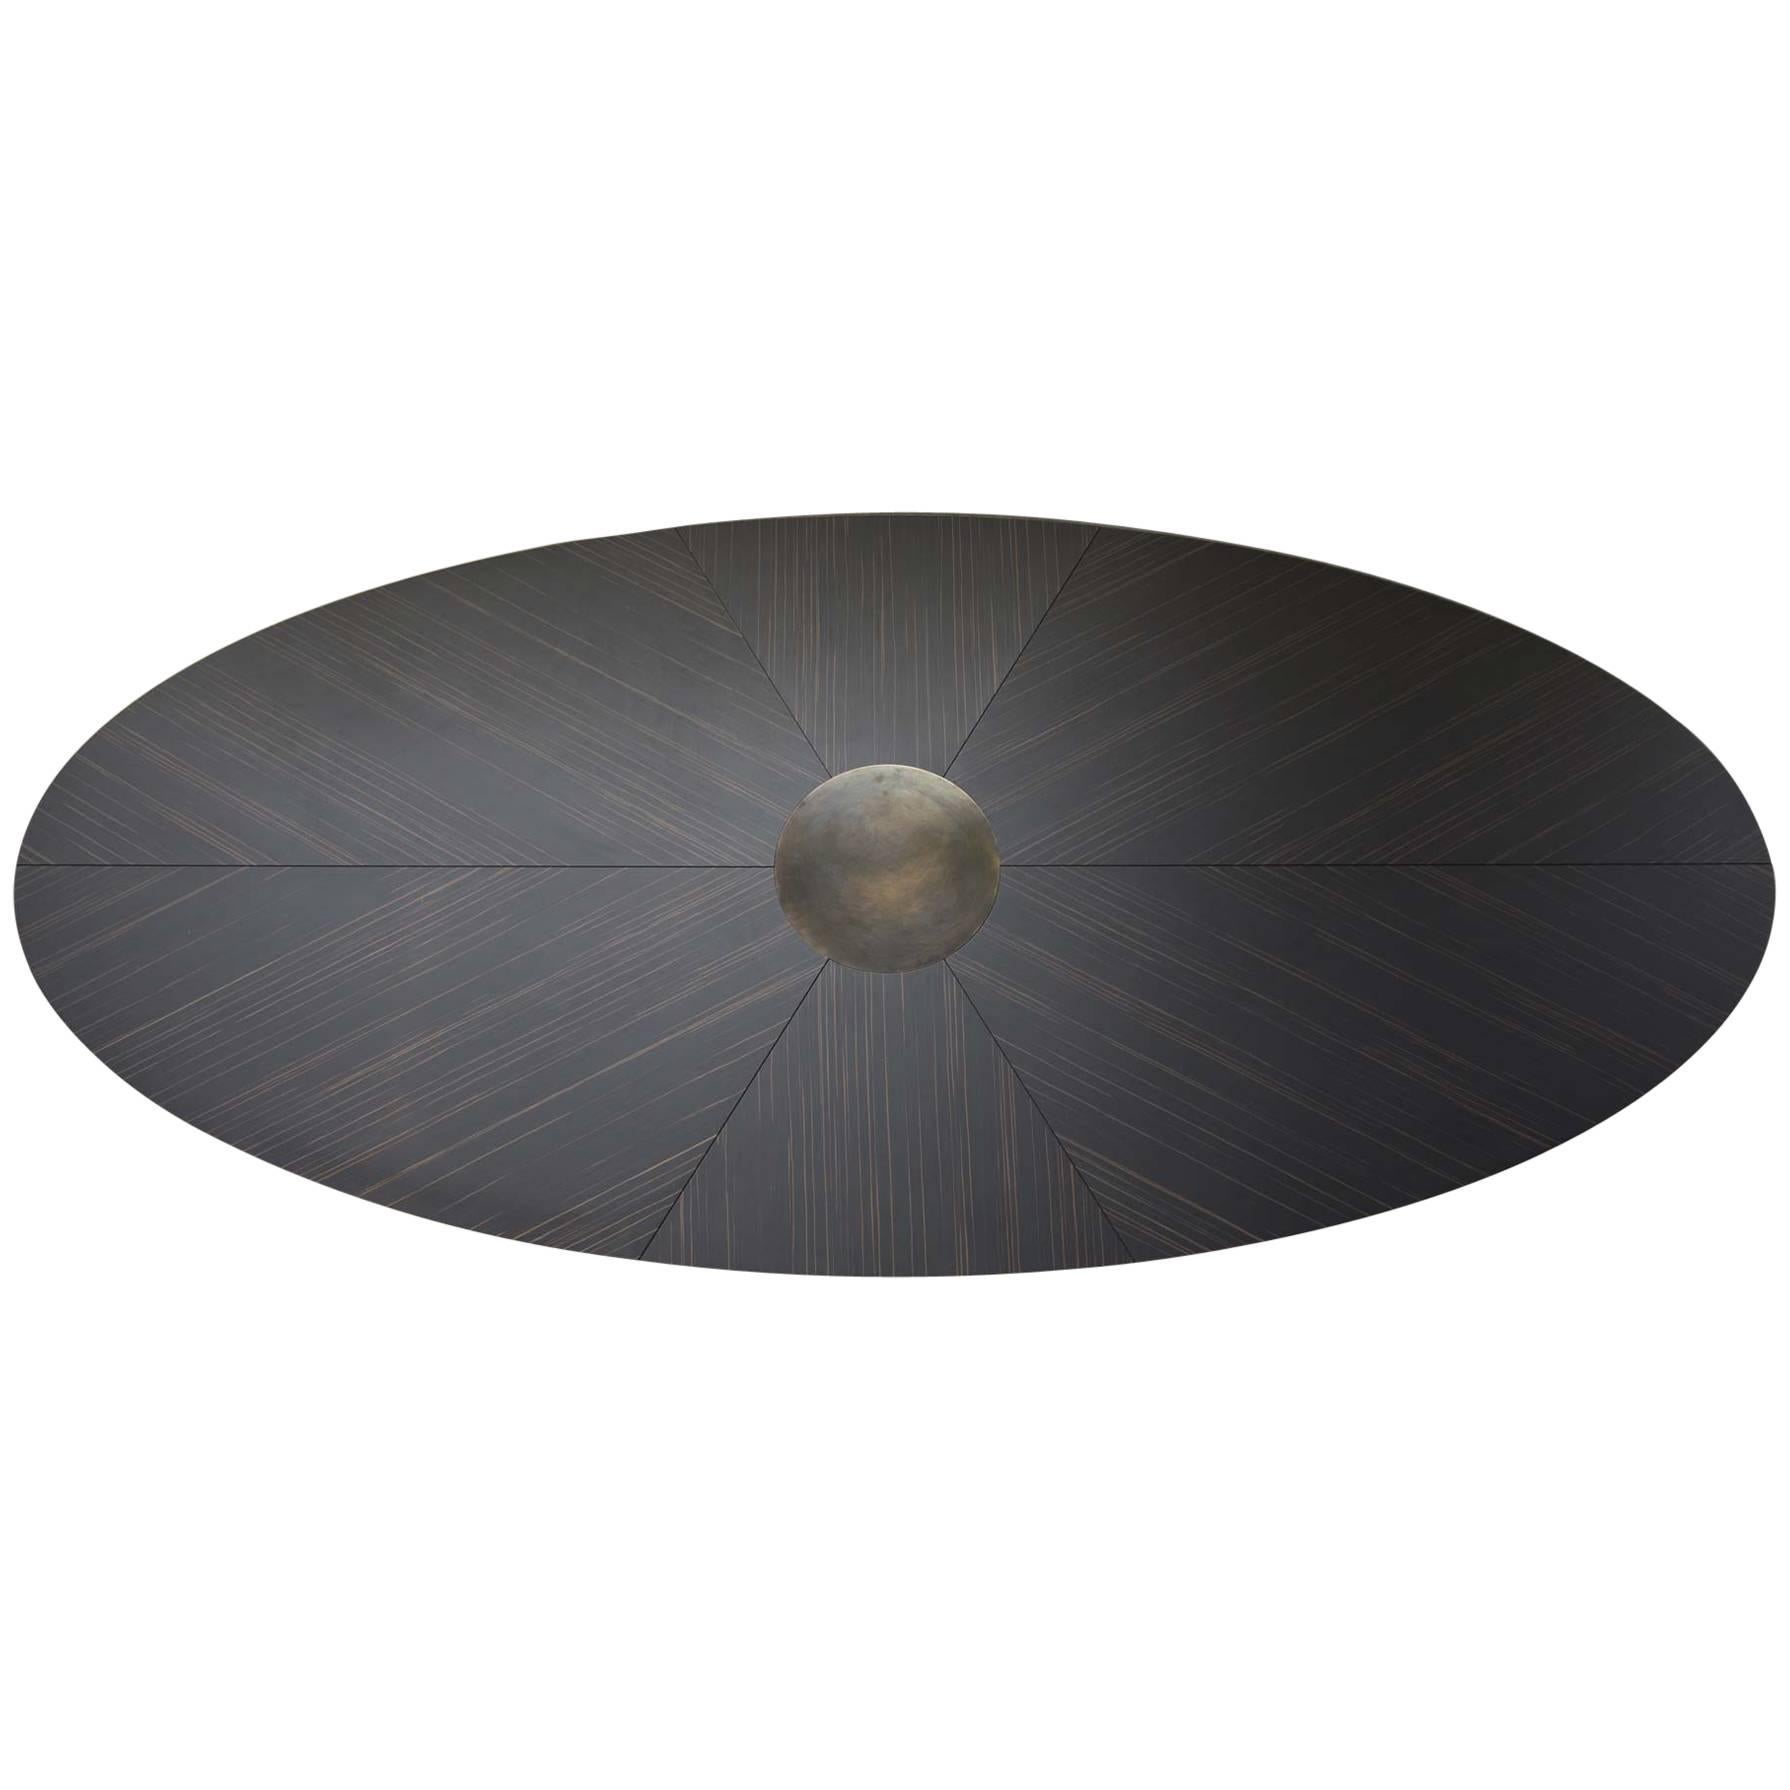 "Grand Table" Oval Table Designed by Stephane Lebrun for Dessie' For Sale